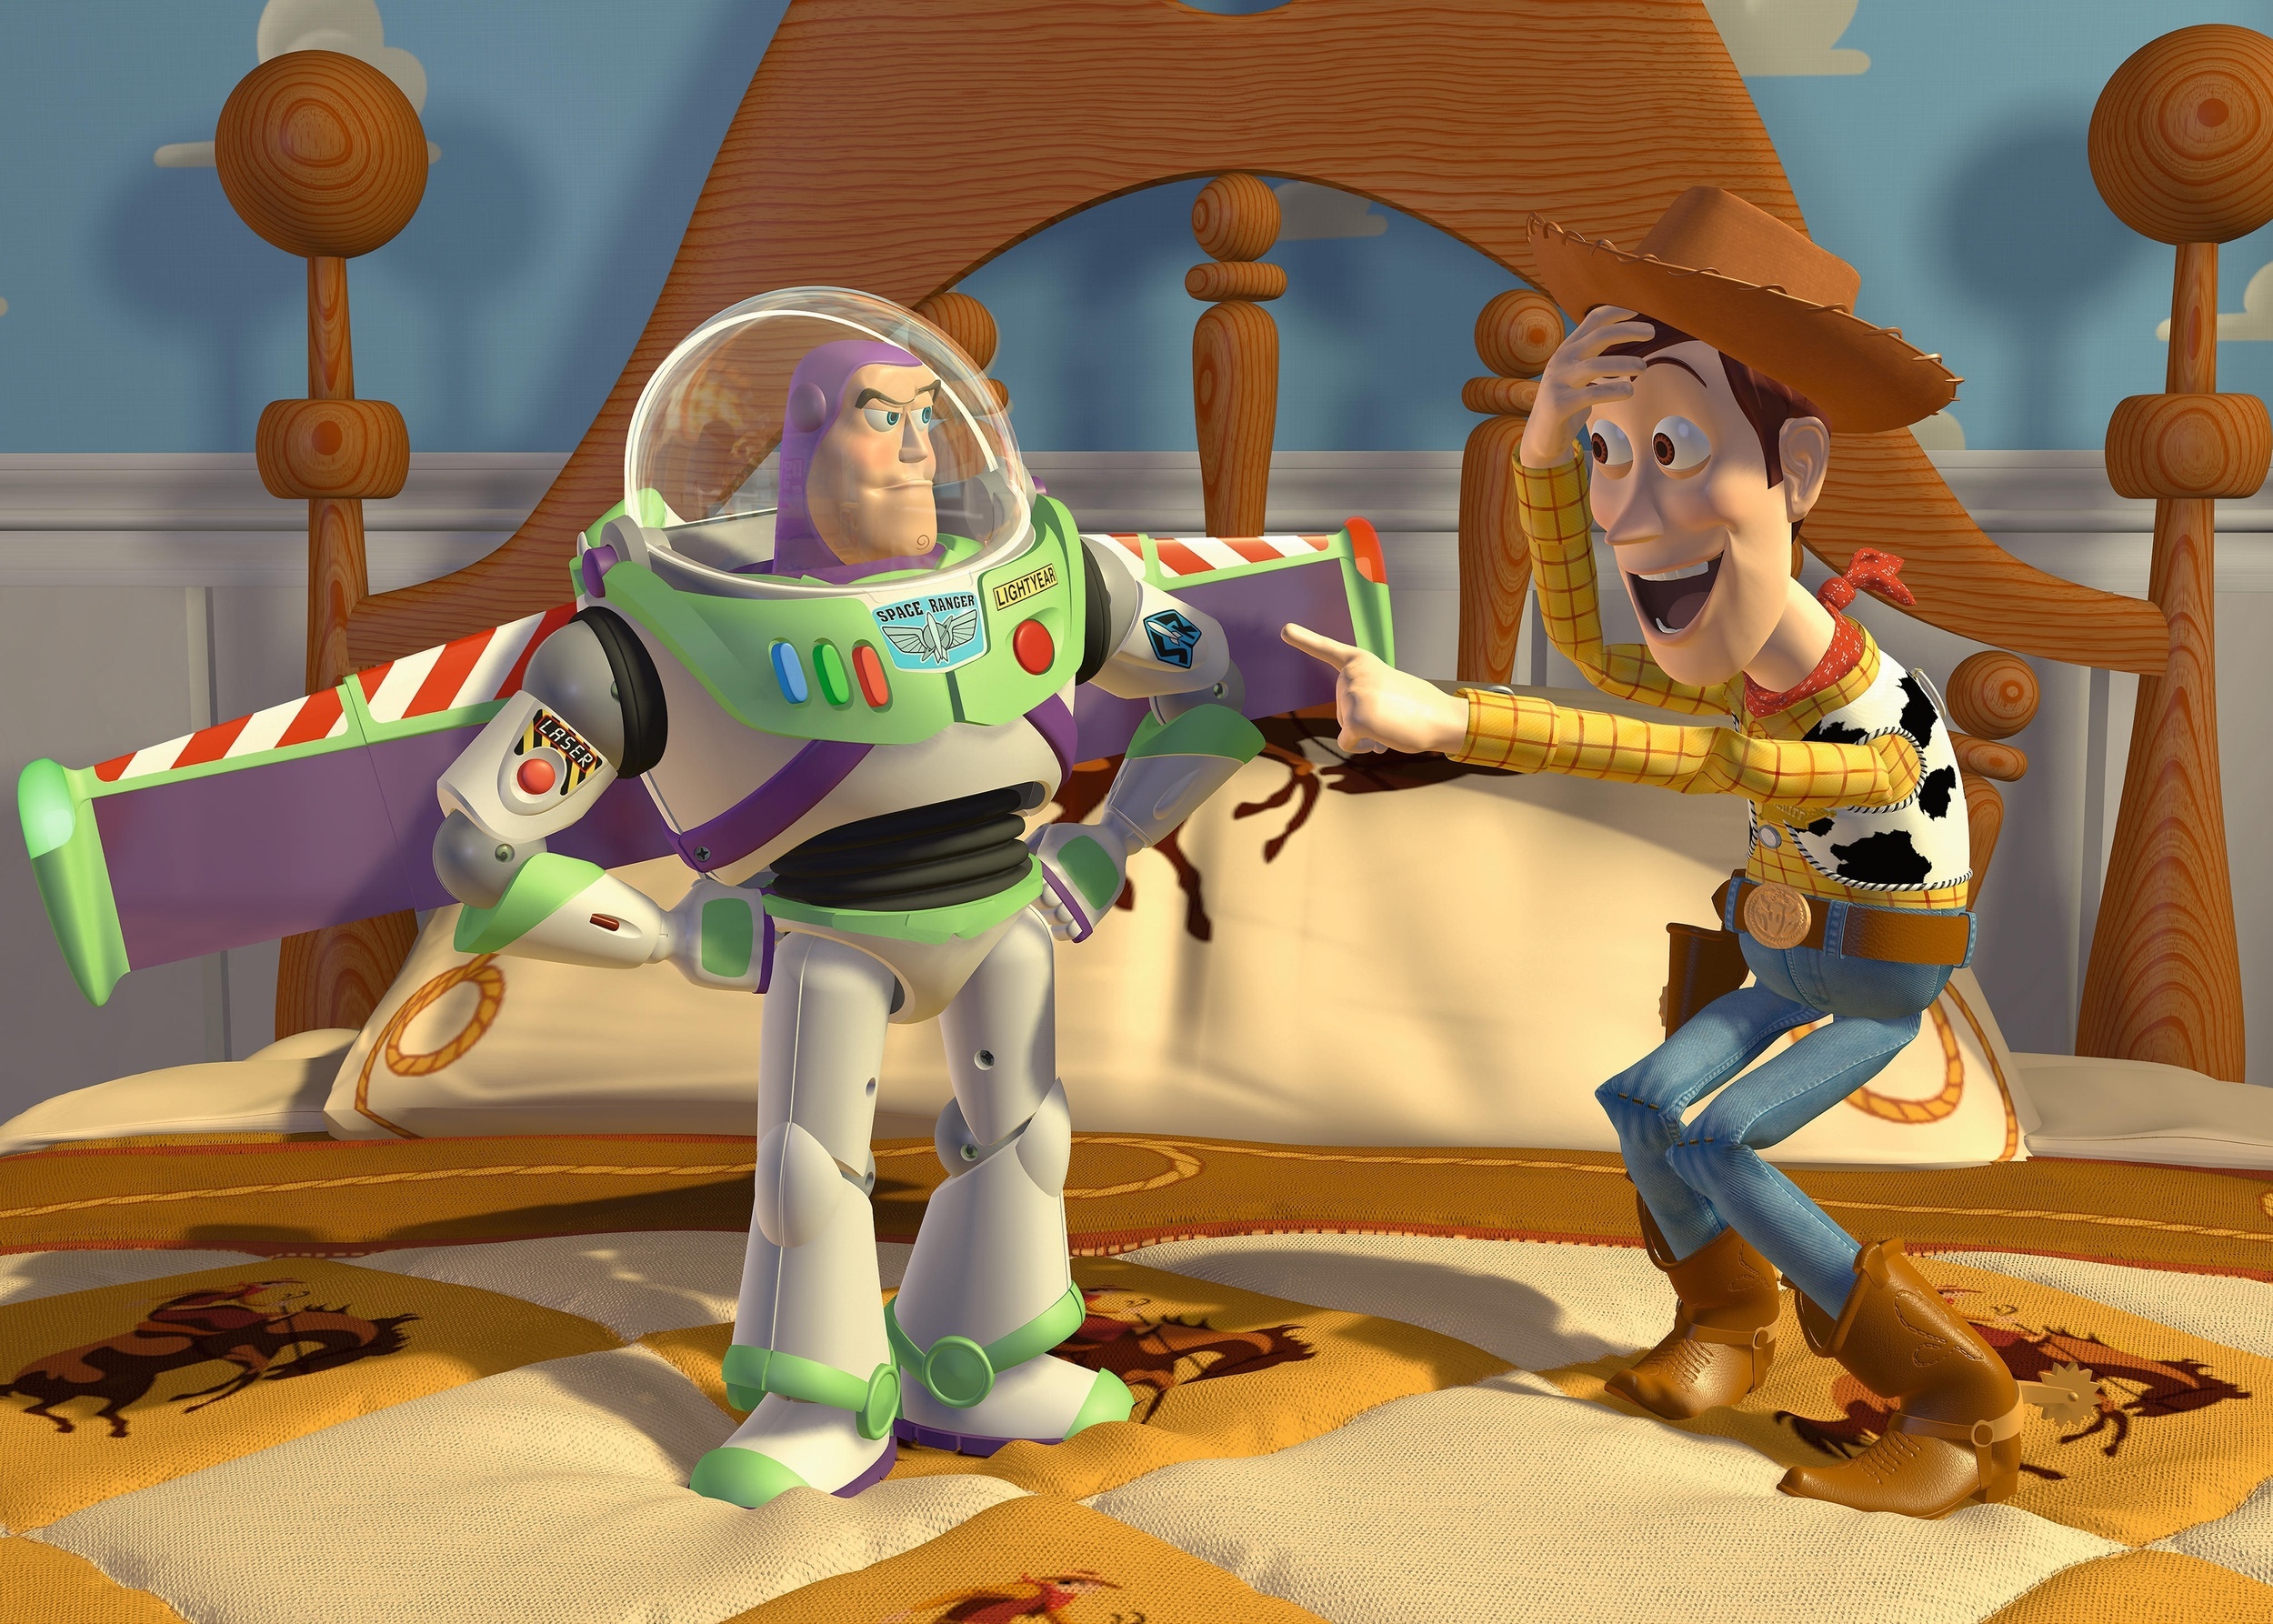 <p>Making a feature film entirely on a computer may be commonplace in today's industry, but Pixar's first attempt with<em> Toy Story </em>was no small feet. However, the hundreds of thousands of hours dedicated to making it would launch Pixar and Disney to a status never seen before in the film industry. </p><p><em>Toy Story</em> was a technological achievement. It was also a trendsetter in storytelling. The tale of Andy's toys is familiar to kids and adults who had a favorite plaything when they were children, and the humor and emotion could reach anyone of any age in the audience. How many kids' movies can say they are just as entertaining to the adults who took them to the theater? <em>Toy Story</em>'s success created a whole new medium for animation and storytelling. </p><p><a href='https://www.msn.com/en-us/community/channel/vid-cj9pqbr0vn9in2b6ddcd8sfgpfq6x6utp44fssrv6mc2gtybw0us'>Follow us on MSN to see more of our exclusive entertainment content.</a></p>